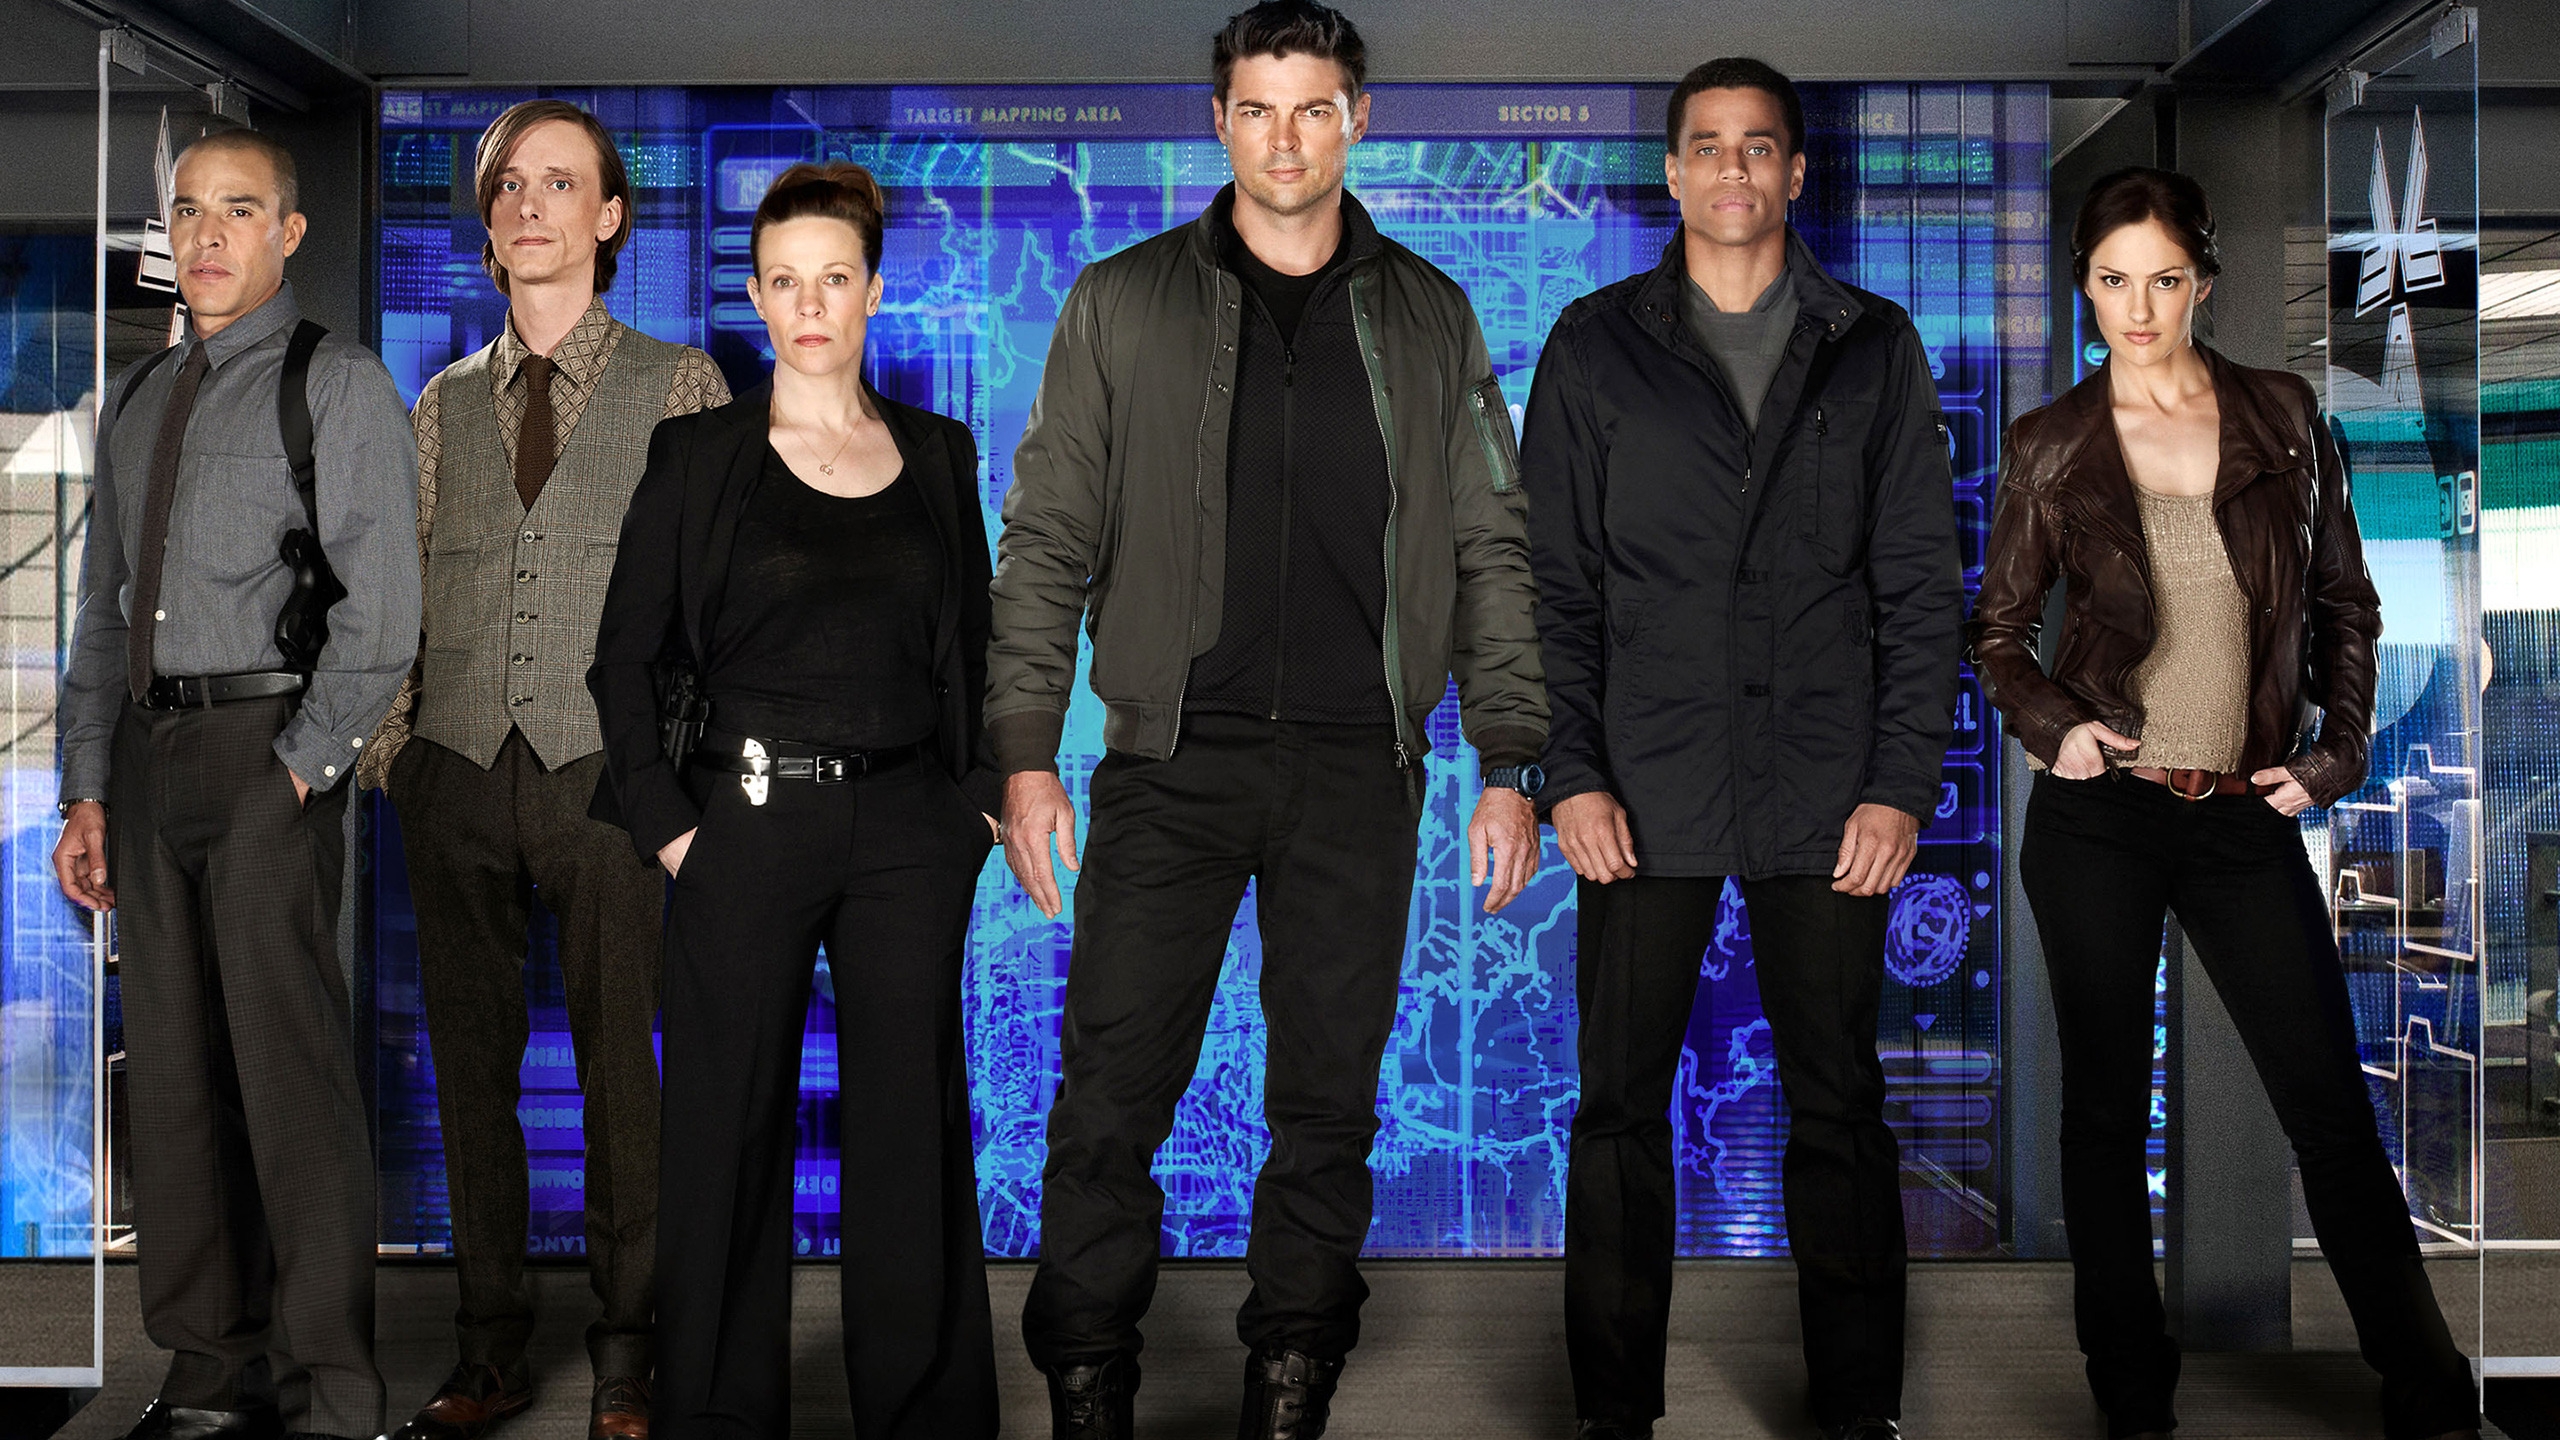 Almost Human Cast for 2560x1440 HDTV resolution